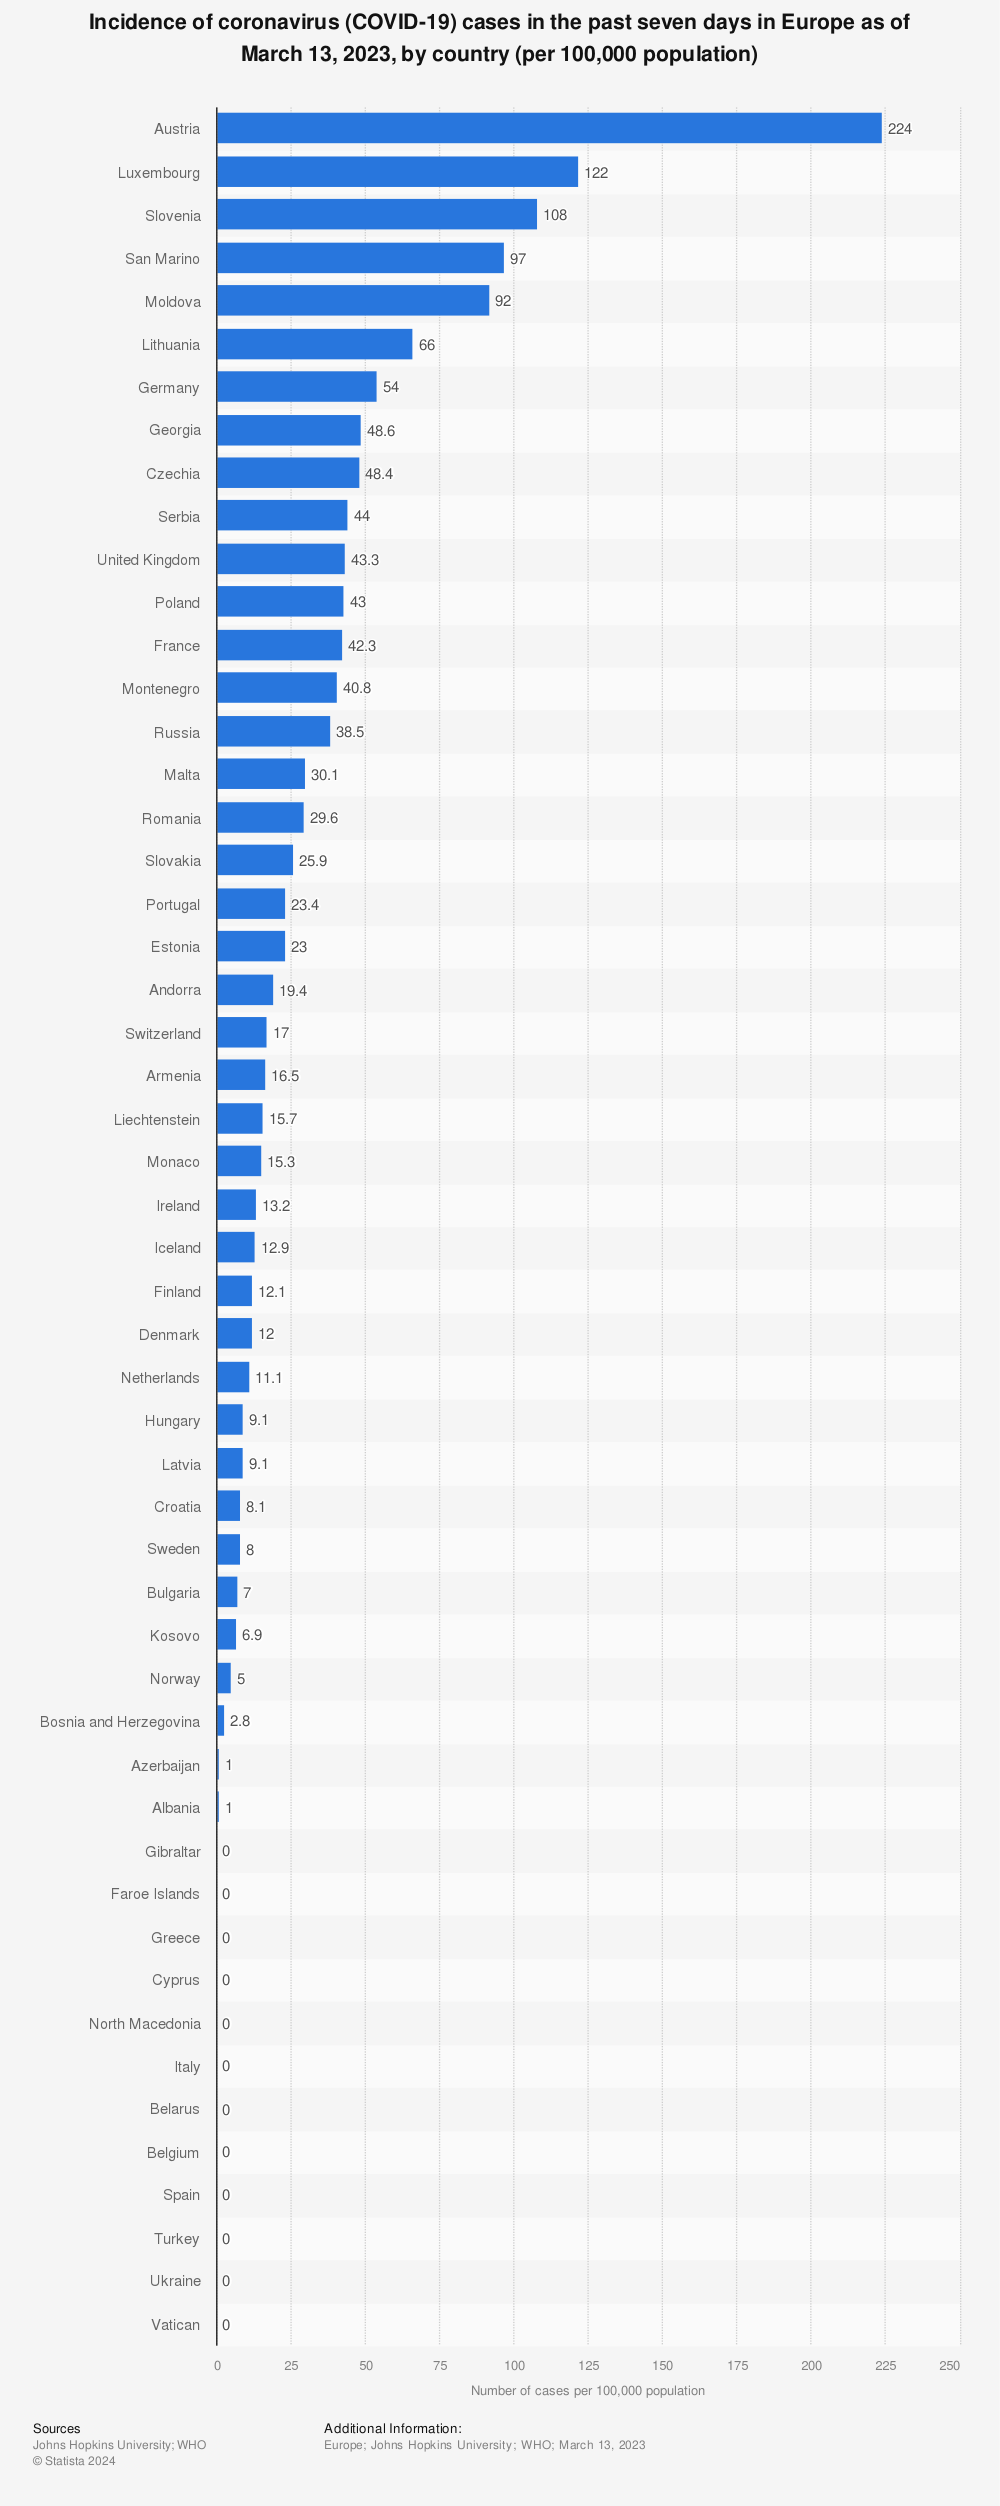 Statistic: Incidence of coronavirus (COVID-19) cases in the past seven days in Europe as of July 1, 2022, by country (per 100,000 population) | Statista